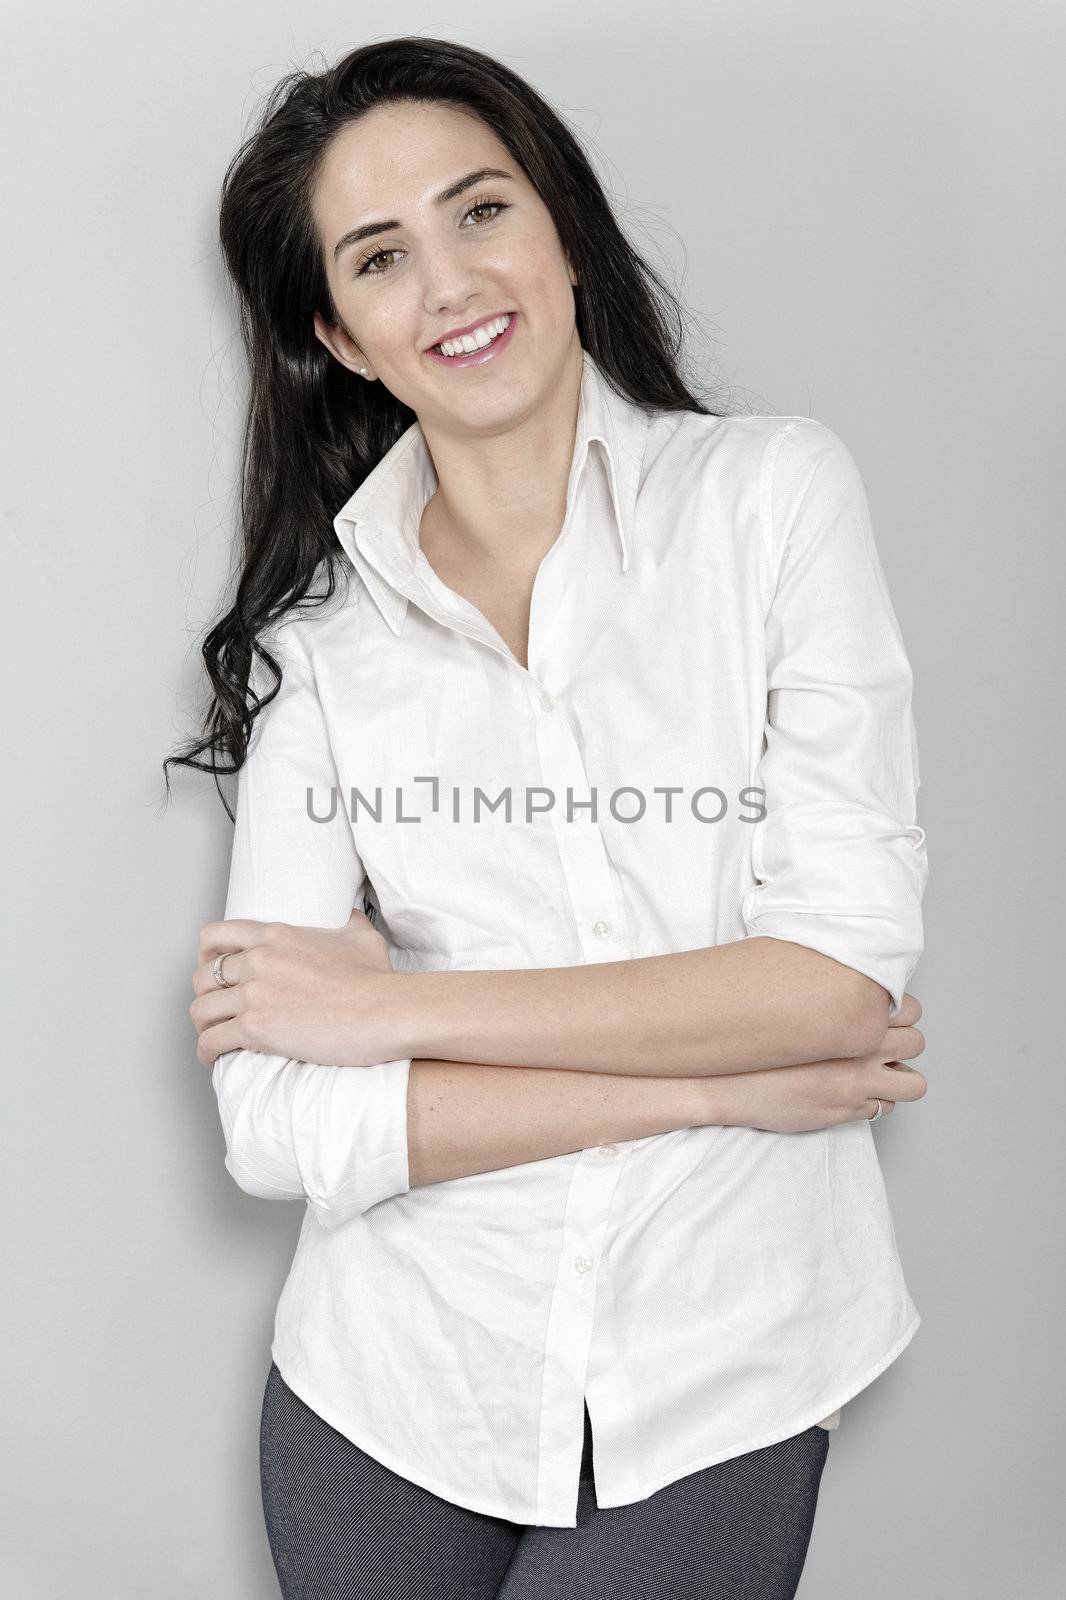 Attractive young woman in white shirt smiling and laughing